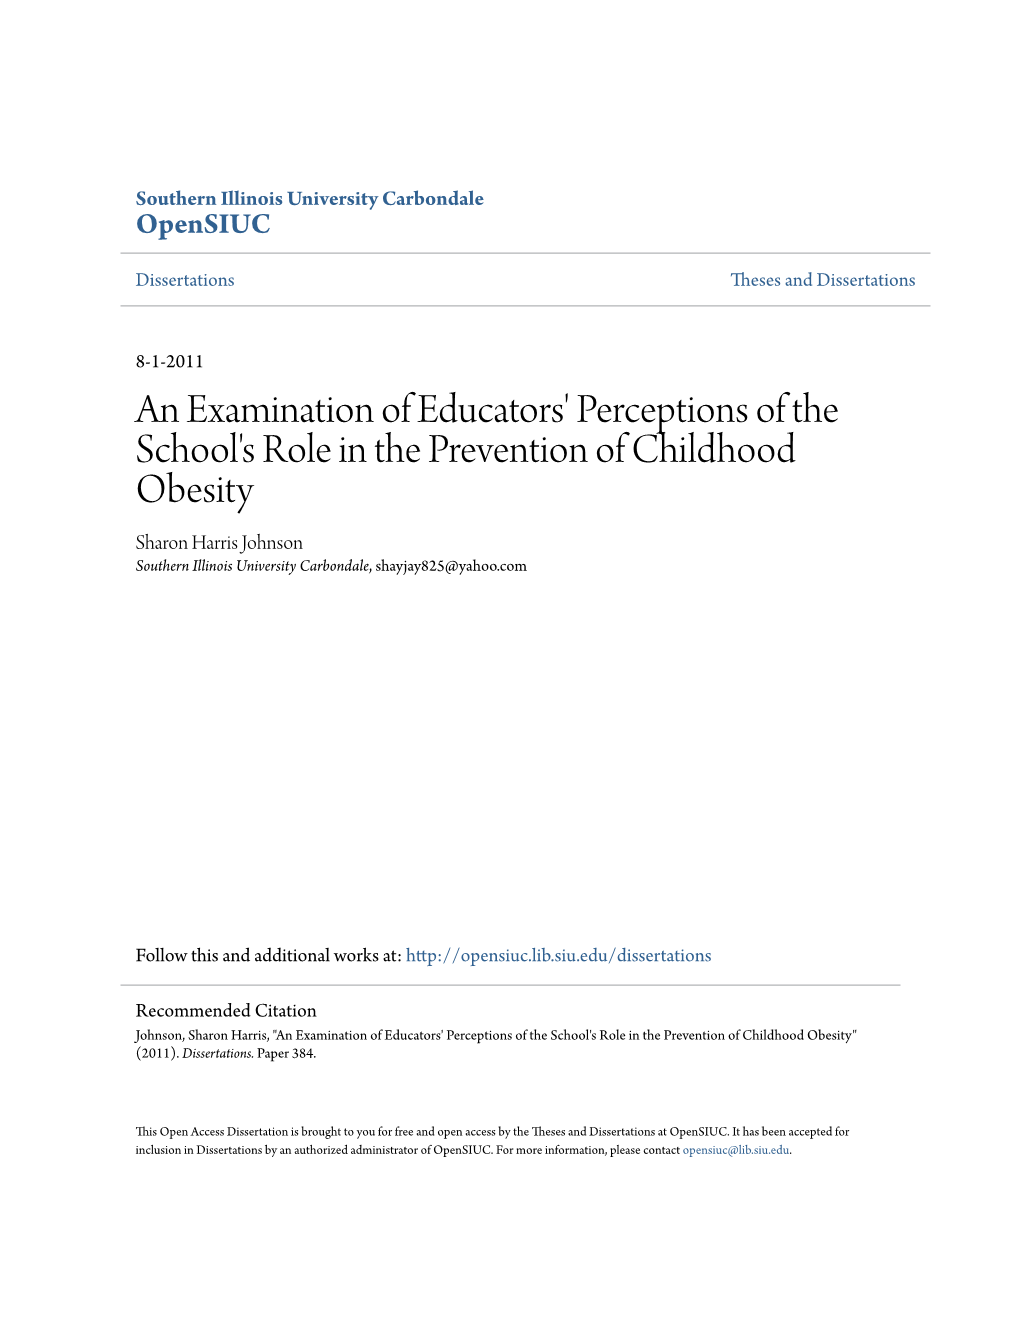 An Examination of Educators' Perceptions of the School's Role In